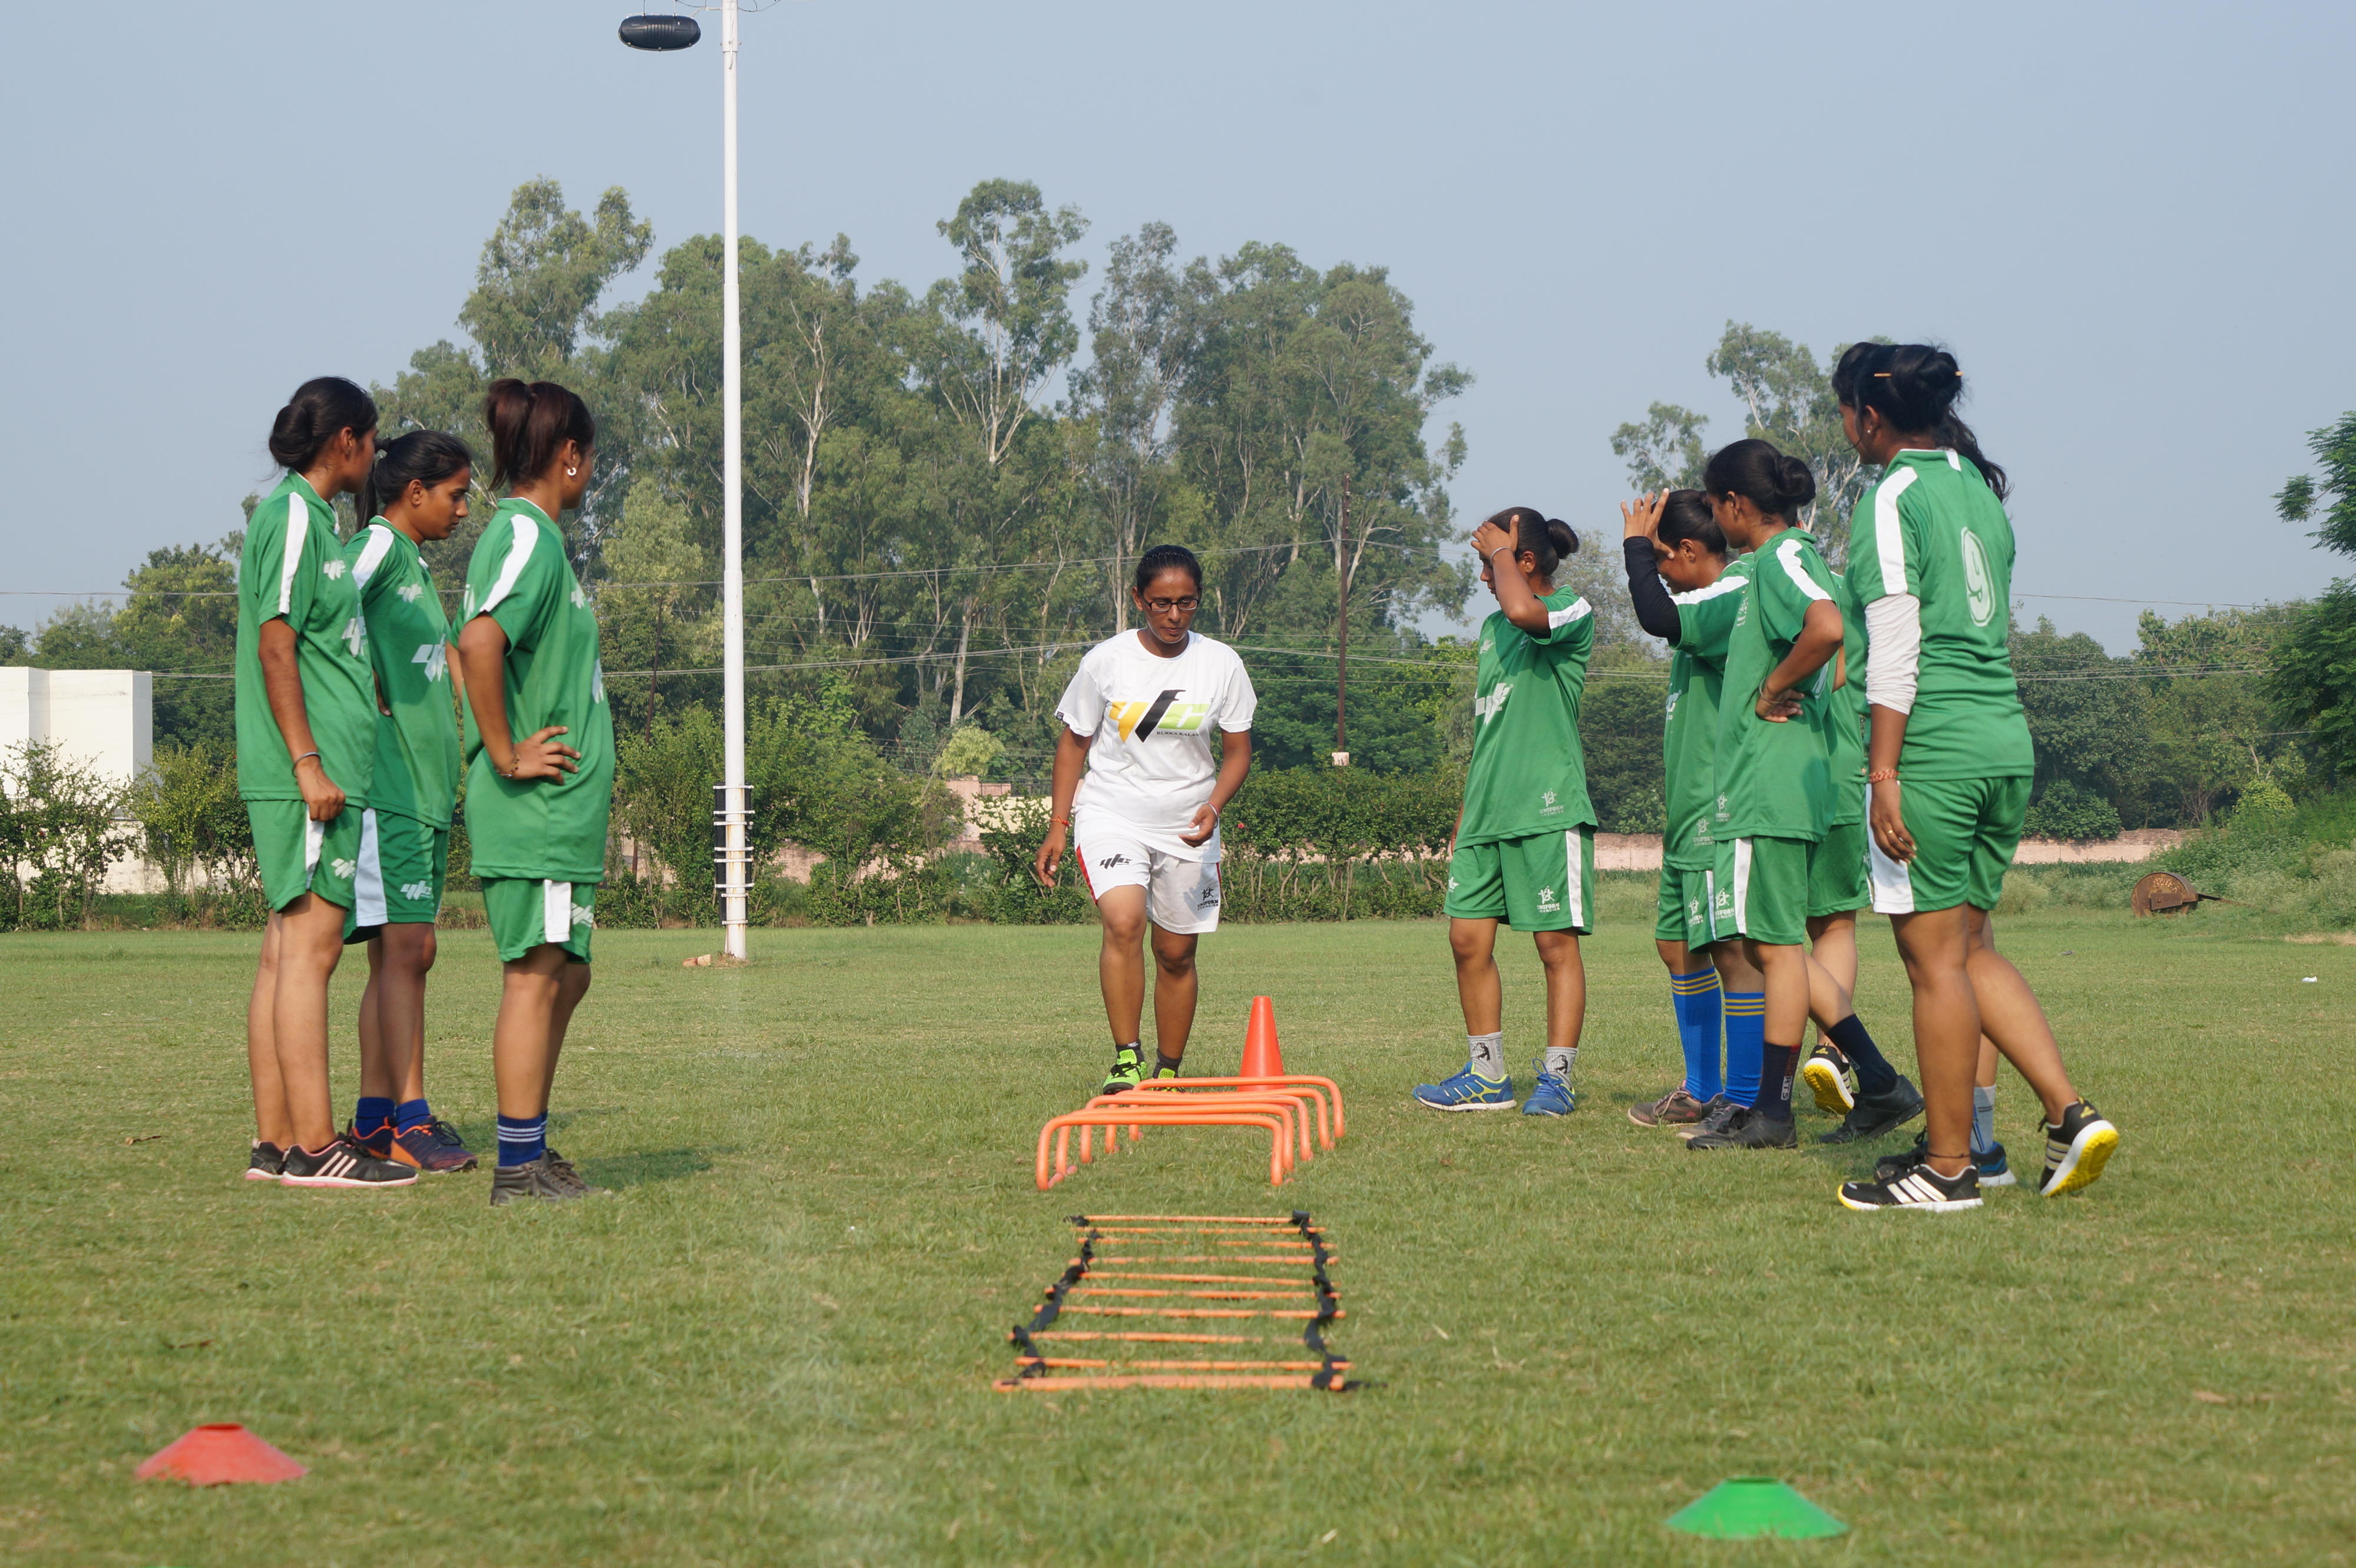 Through sport, children and young people in the cotton growing regions in India build social relationships and are made more aware of environmental protection.